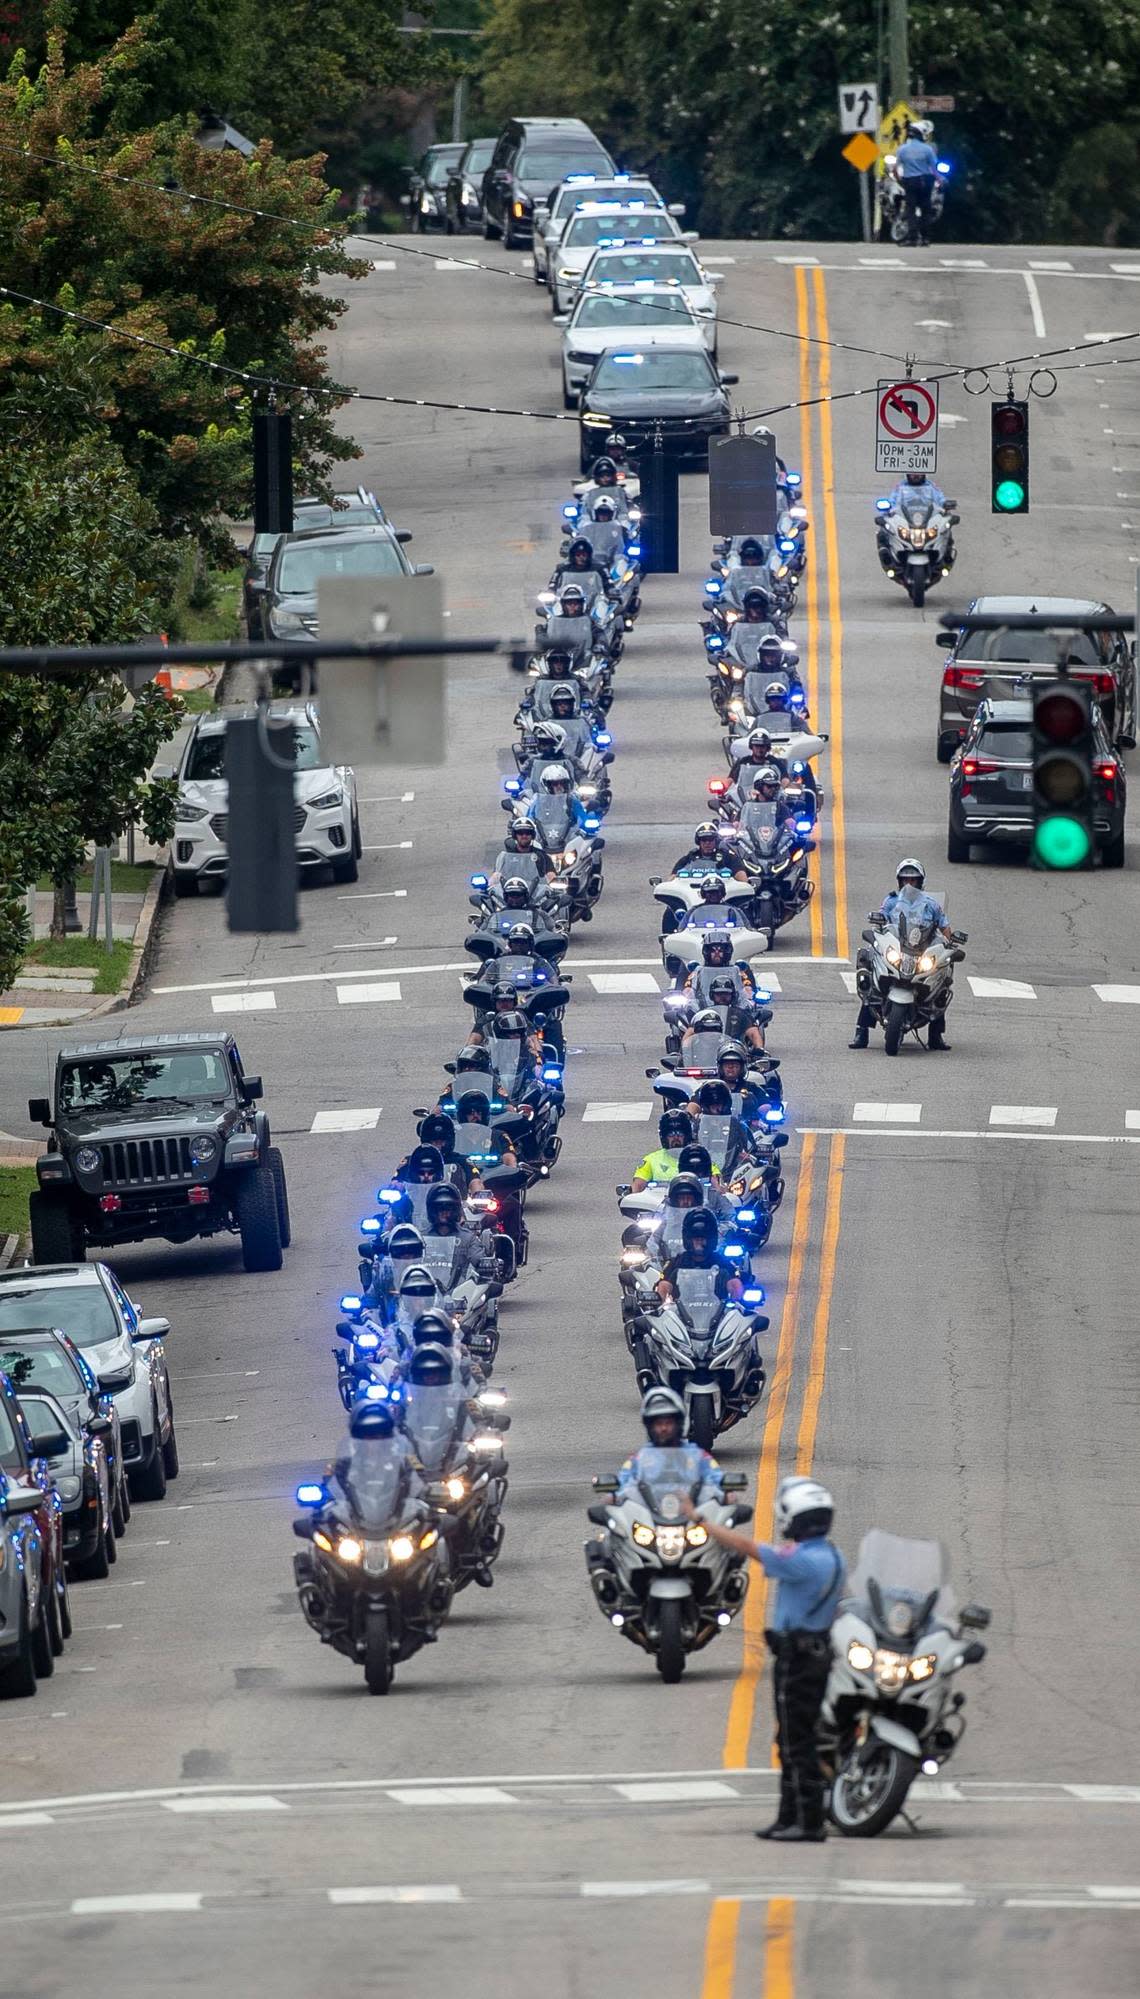 The funeral recessional for Wake County Deputy Ned Byrd makes it way down Glenwood Avenue toward Brown-Wynne Funeral Home on St Marys Street following the service at Providence Baptist Church on Friday, August 19, 2022 in Raleigh, N.C.